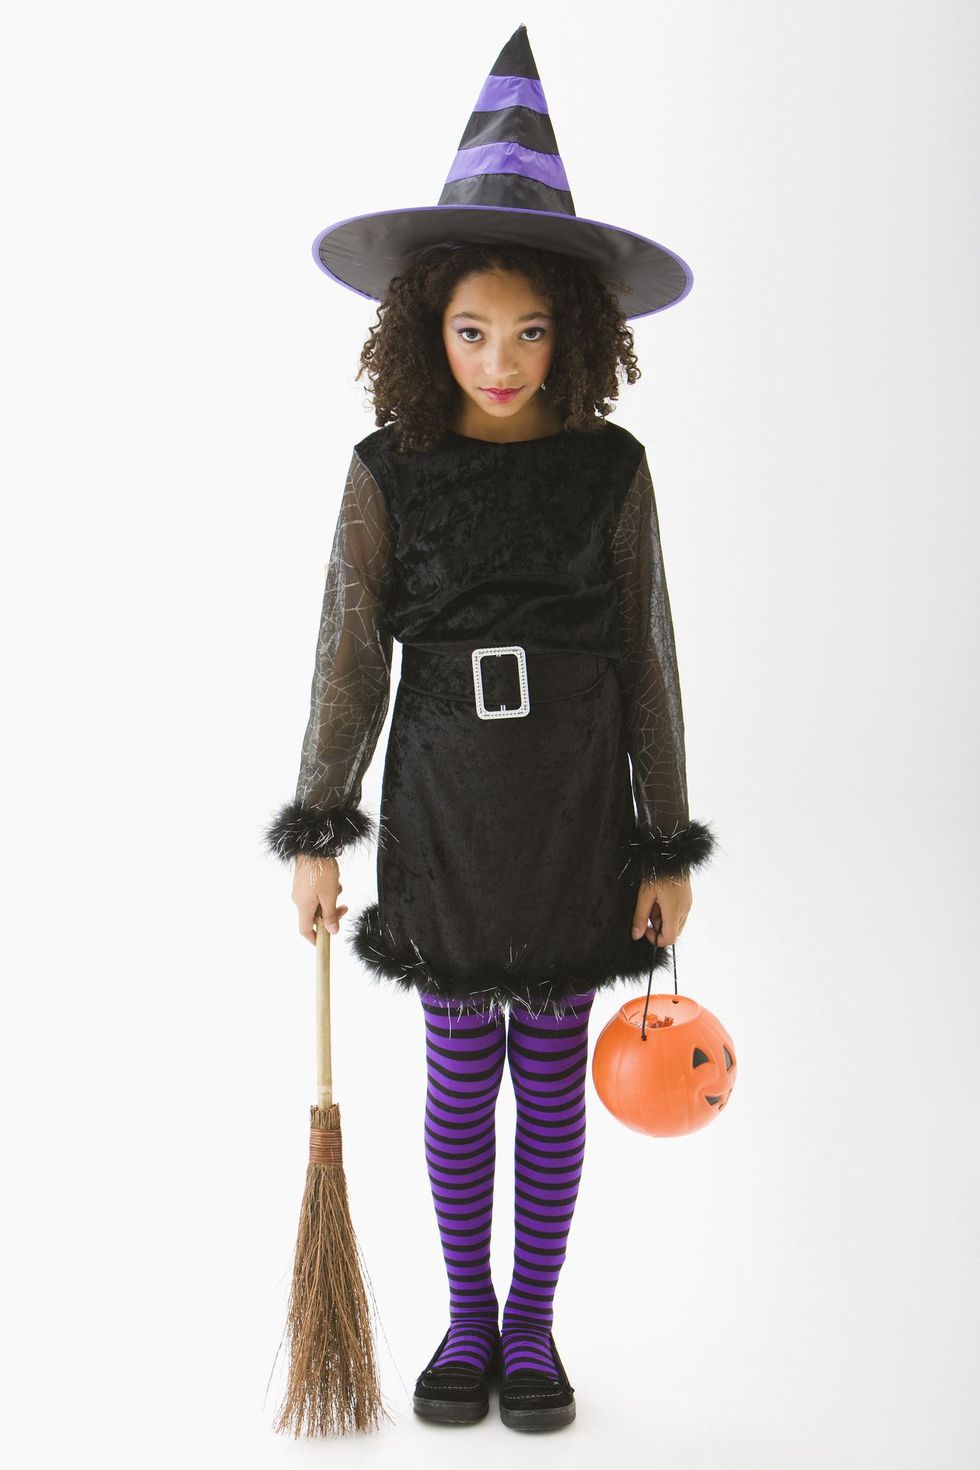 tween girl, 11 or 12 years old, in witch costume for halloween with hat, purple and black striped tights, belted black dress